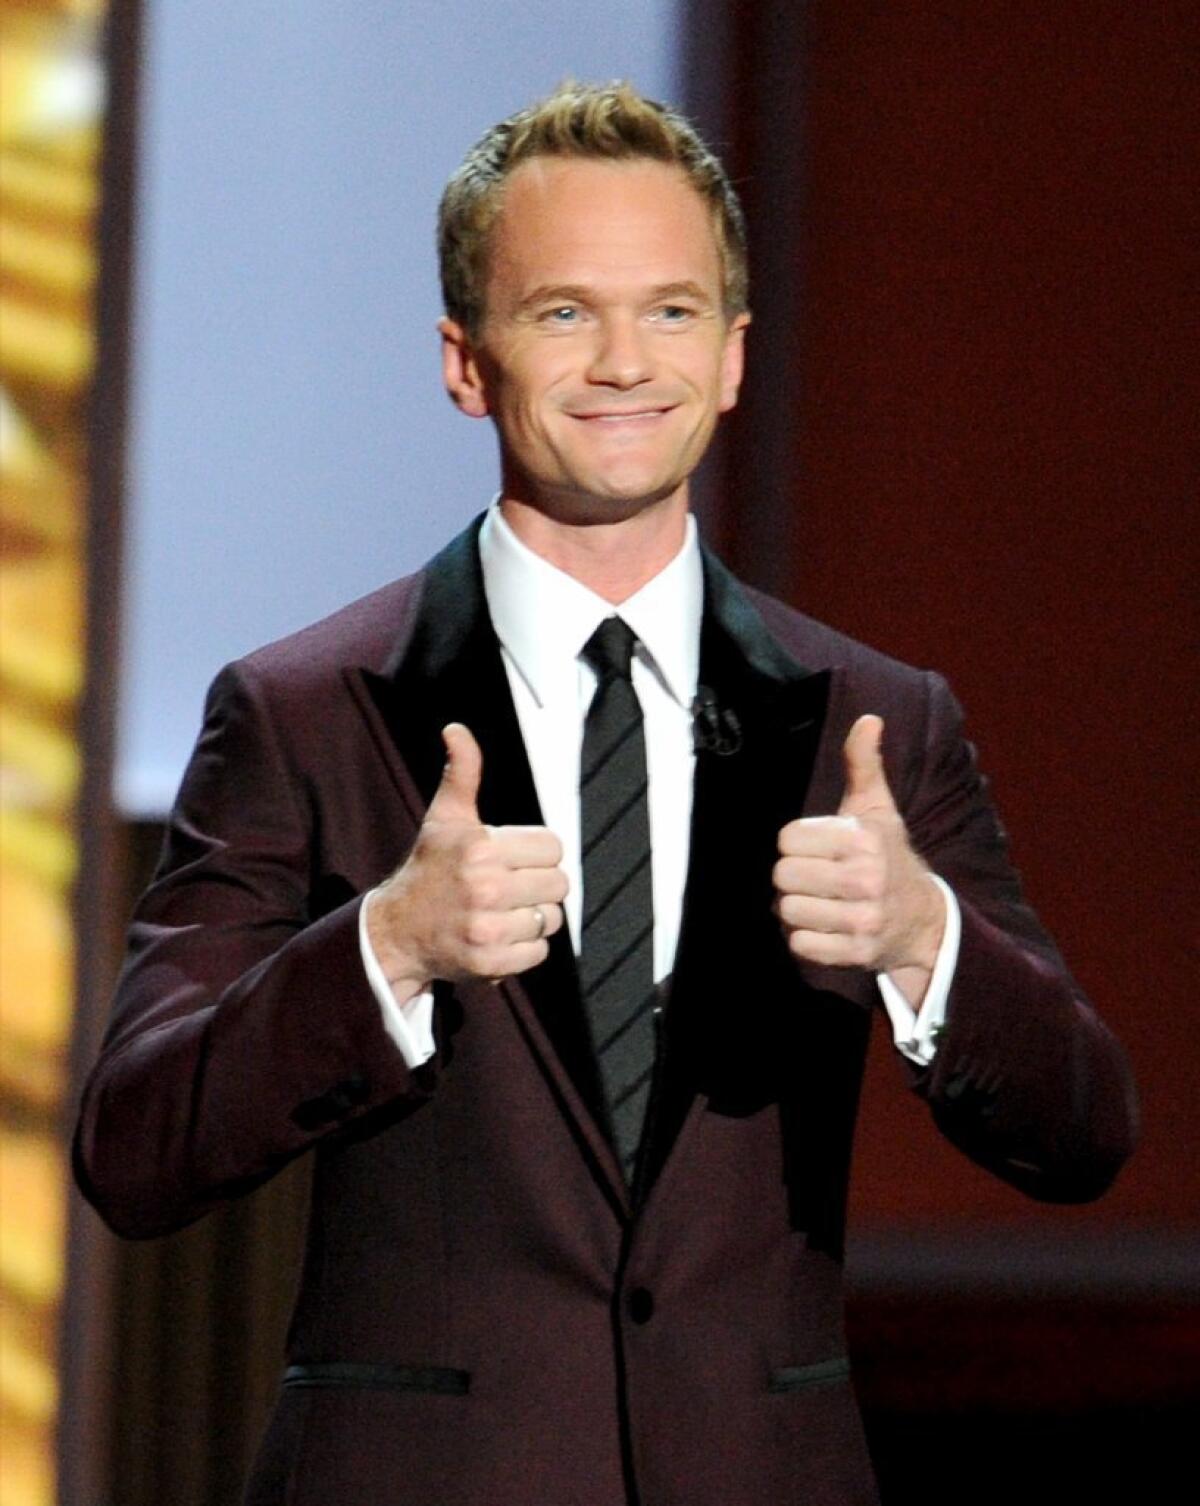 Neil Patrick Harris was host of the 65th Primetime Emmy Awards on CBS.